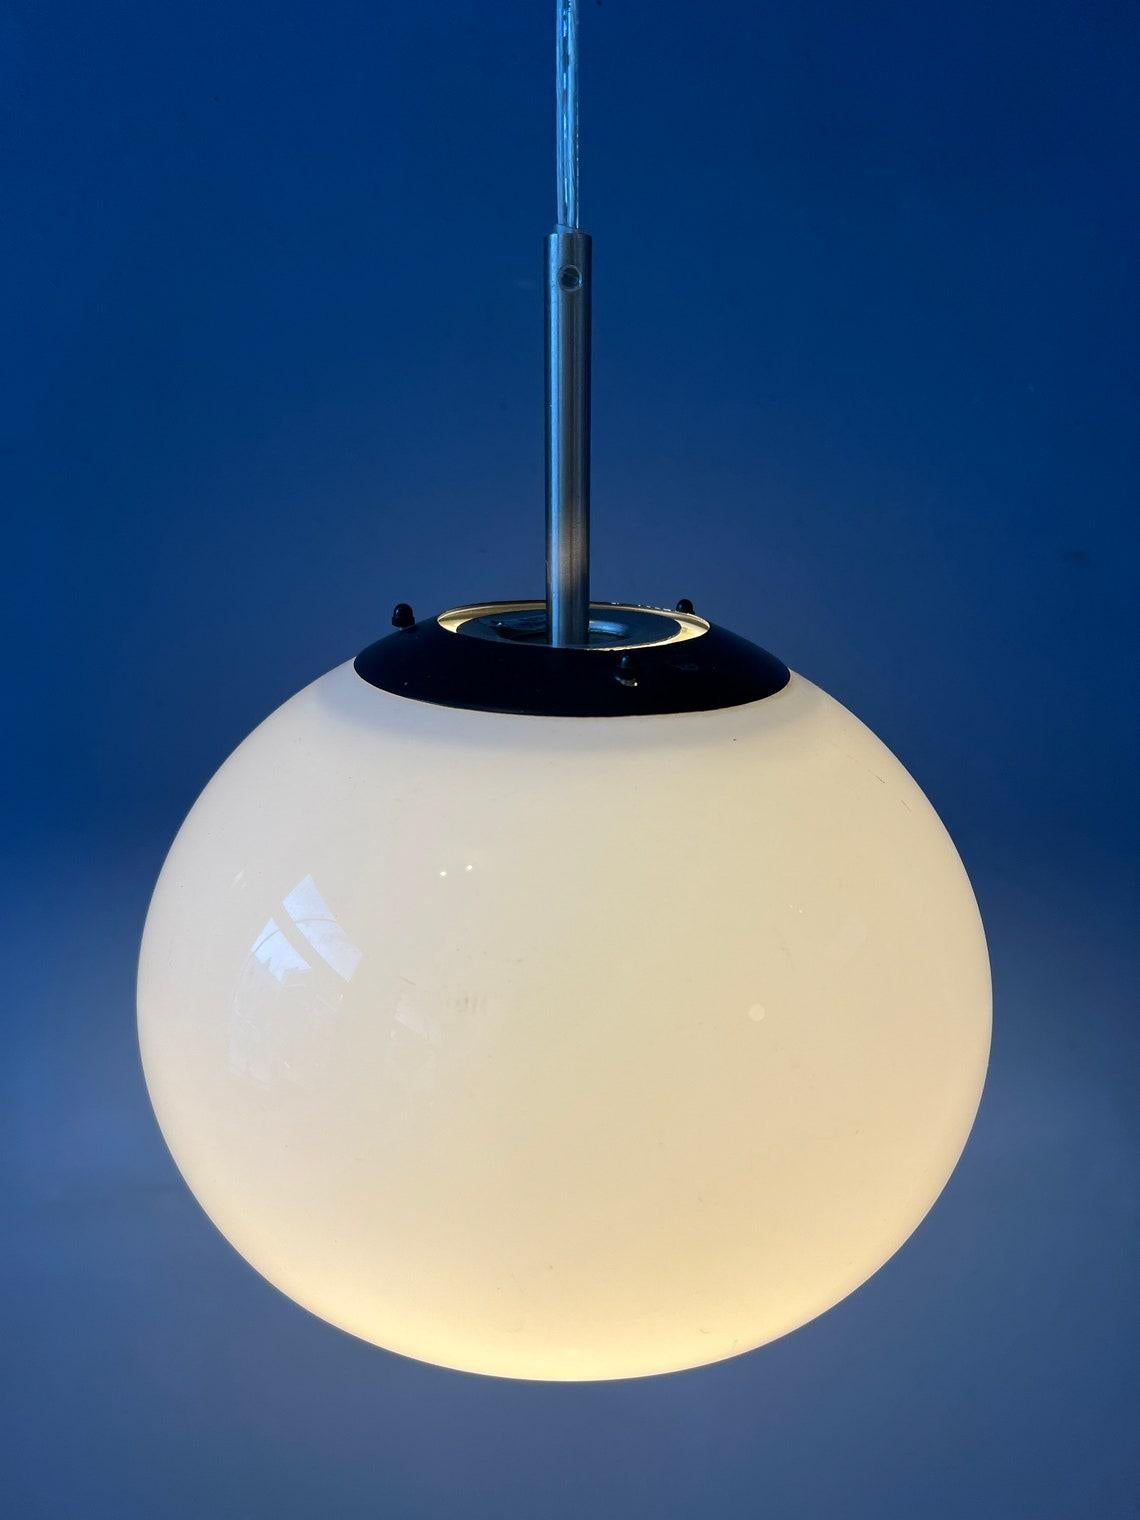 Small white space age mushroom pendant lamp. The mushroom shade is made out of acrylic glass and produces a warm, cosy light. The lamp requires one E27/26 (standard) lightbulb.
2 pieces available

Additional information:
Materials: Metal,